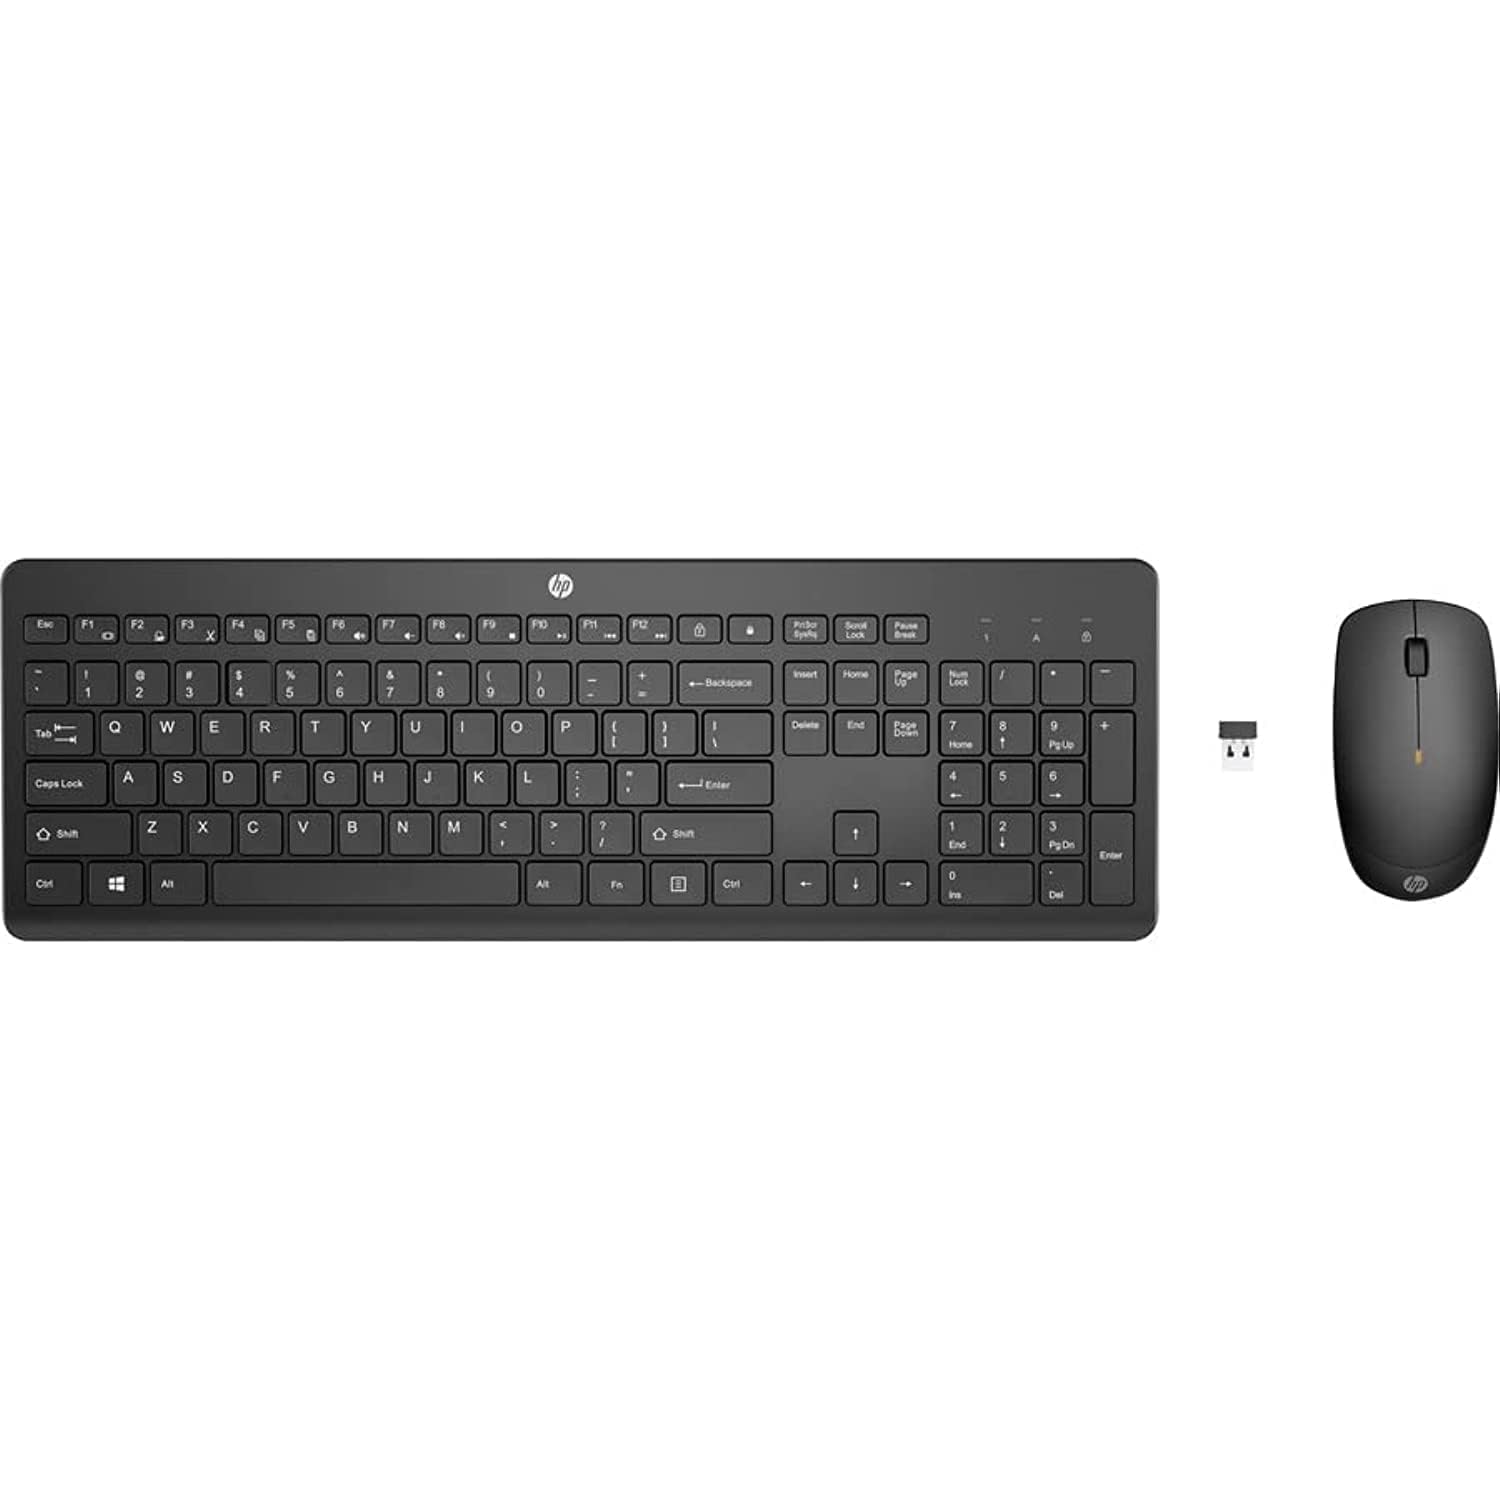 HP 235 Wireless Mouse and Keyboard Combo,Black